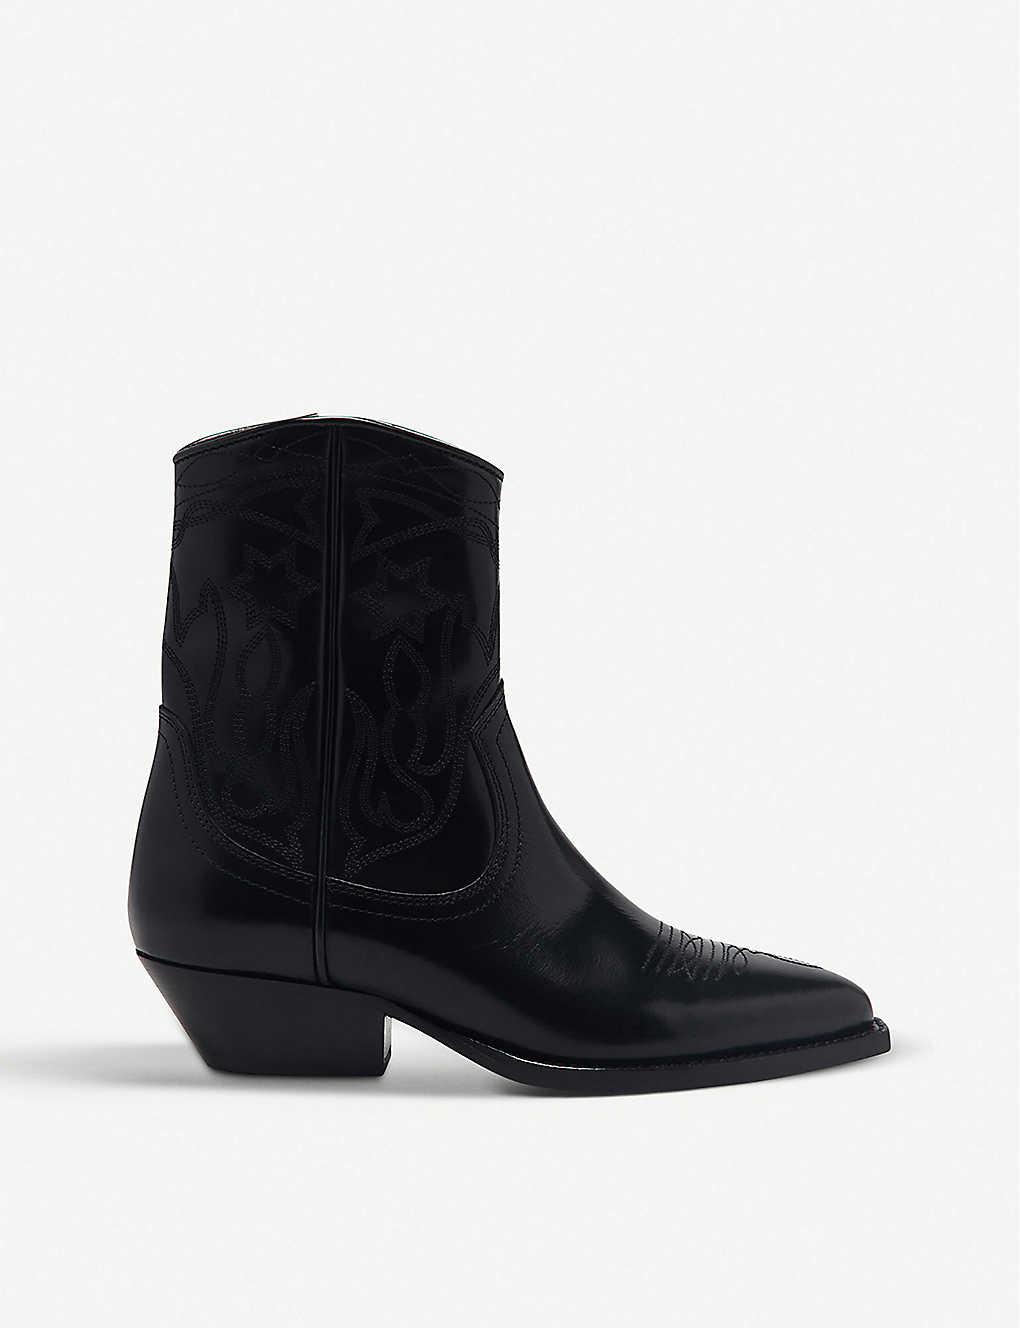 Sandro Jim Embroidered Leather Cowboy Boots in Black - Lyst